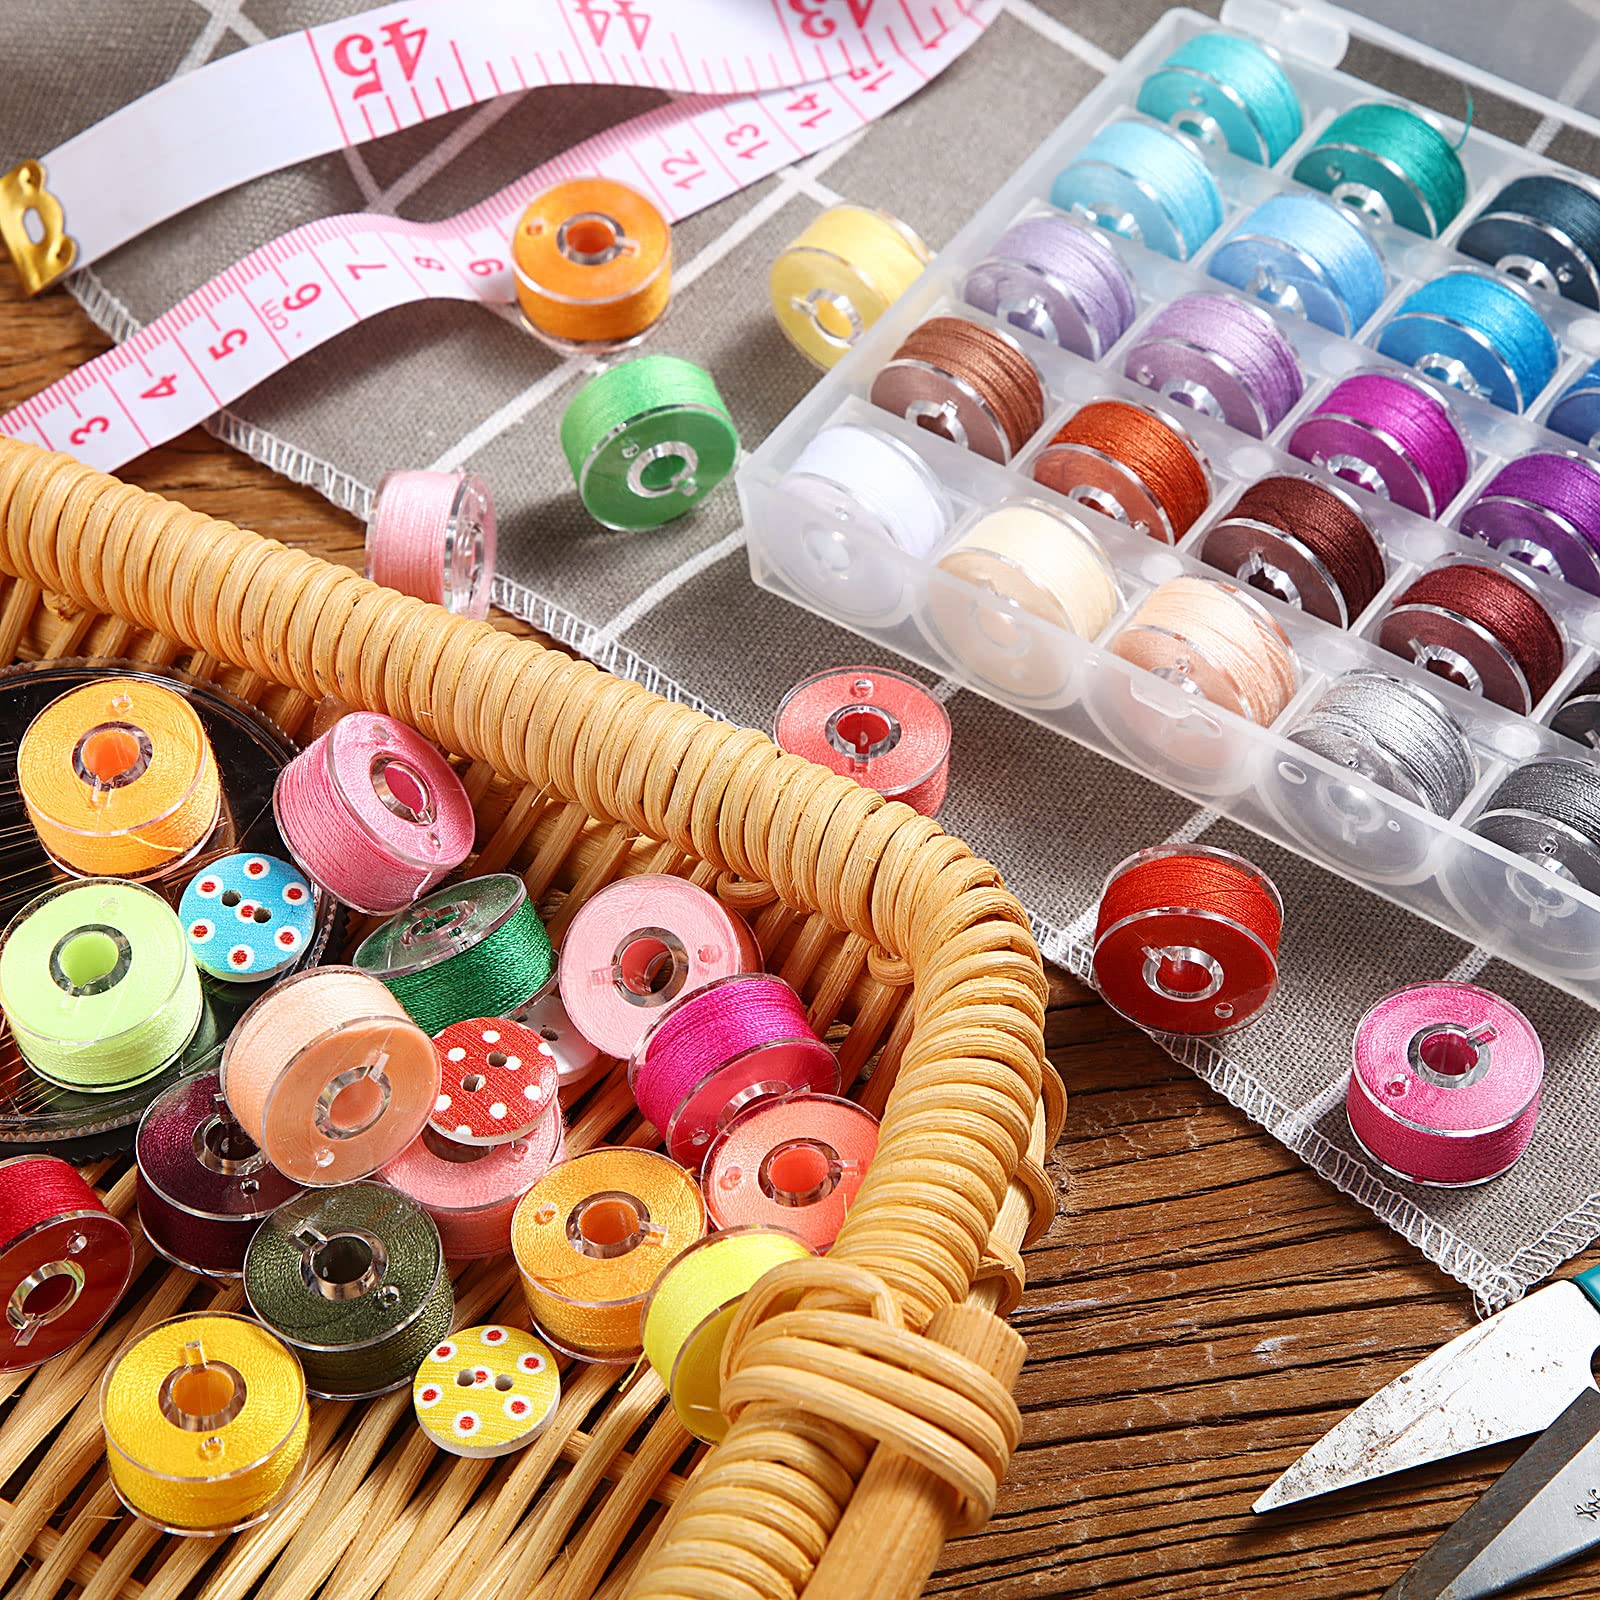 Prewound Thread Bobbins with Bobbin Box for Brother, Babylock, Janome, Elna, Singer, Assorted Colors, 50 Pieces